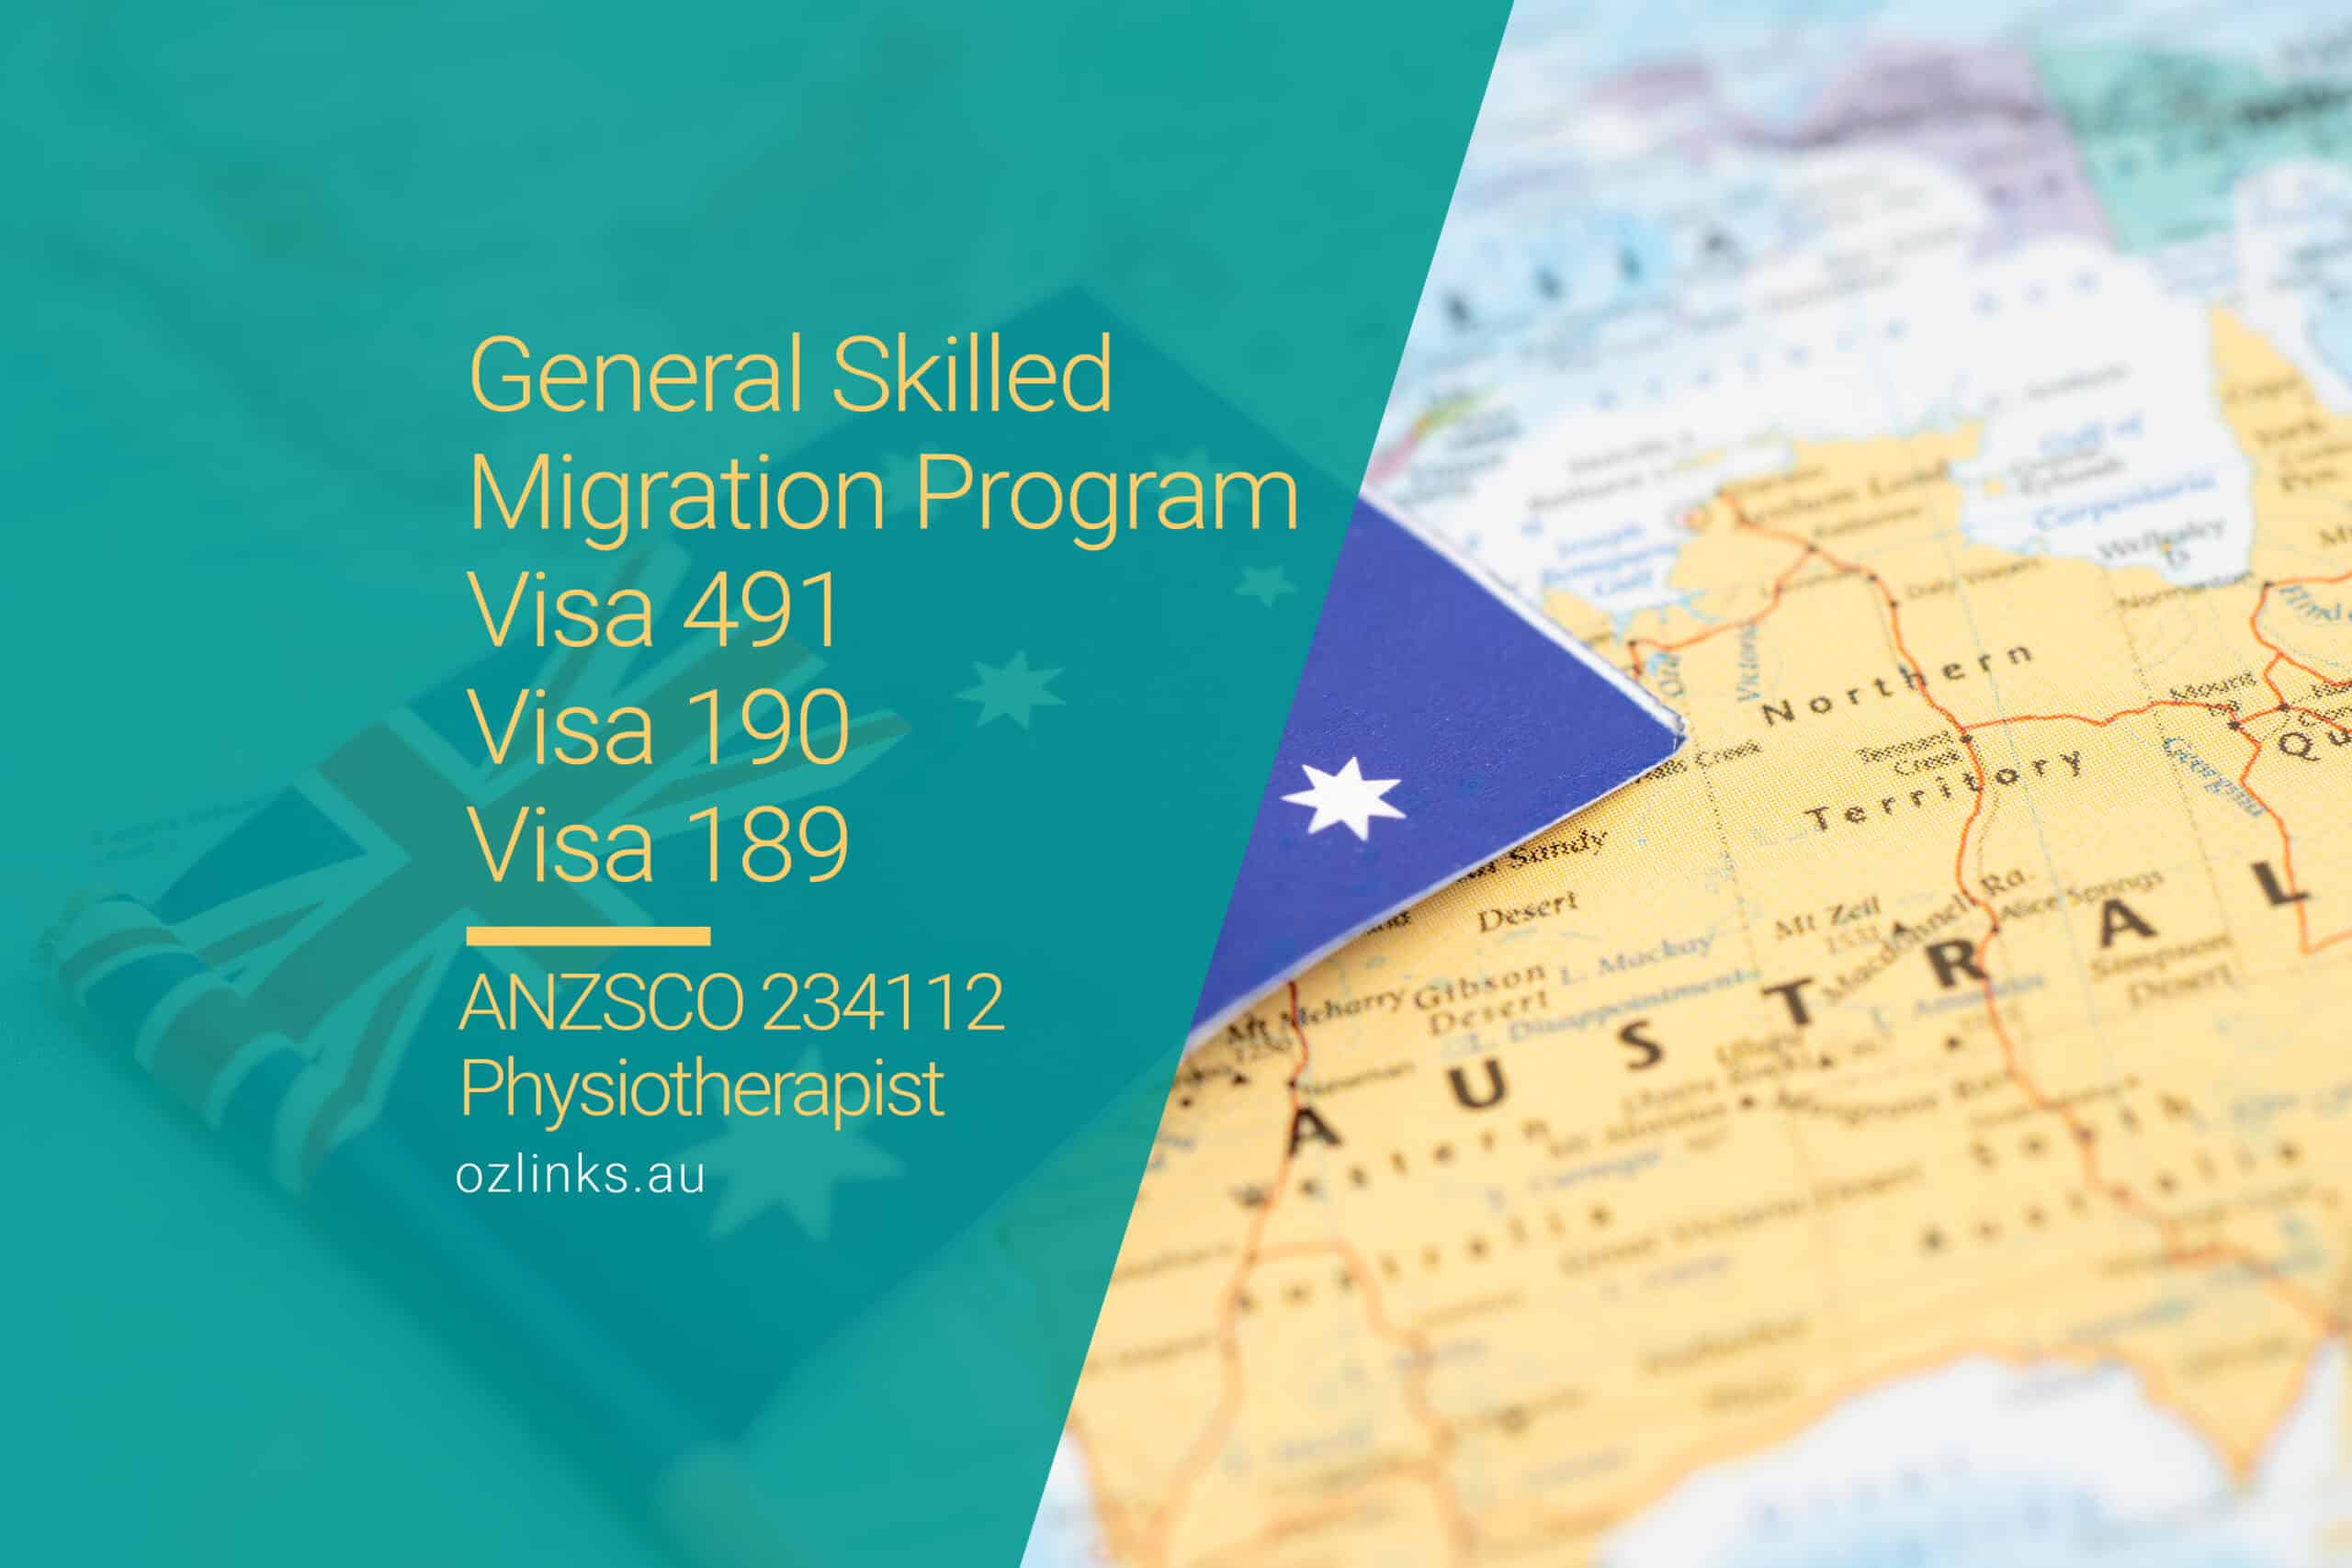 How to Migrate to Australia as a Physiotherapist